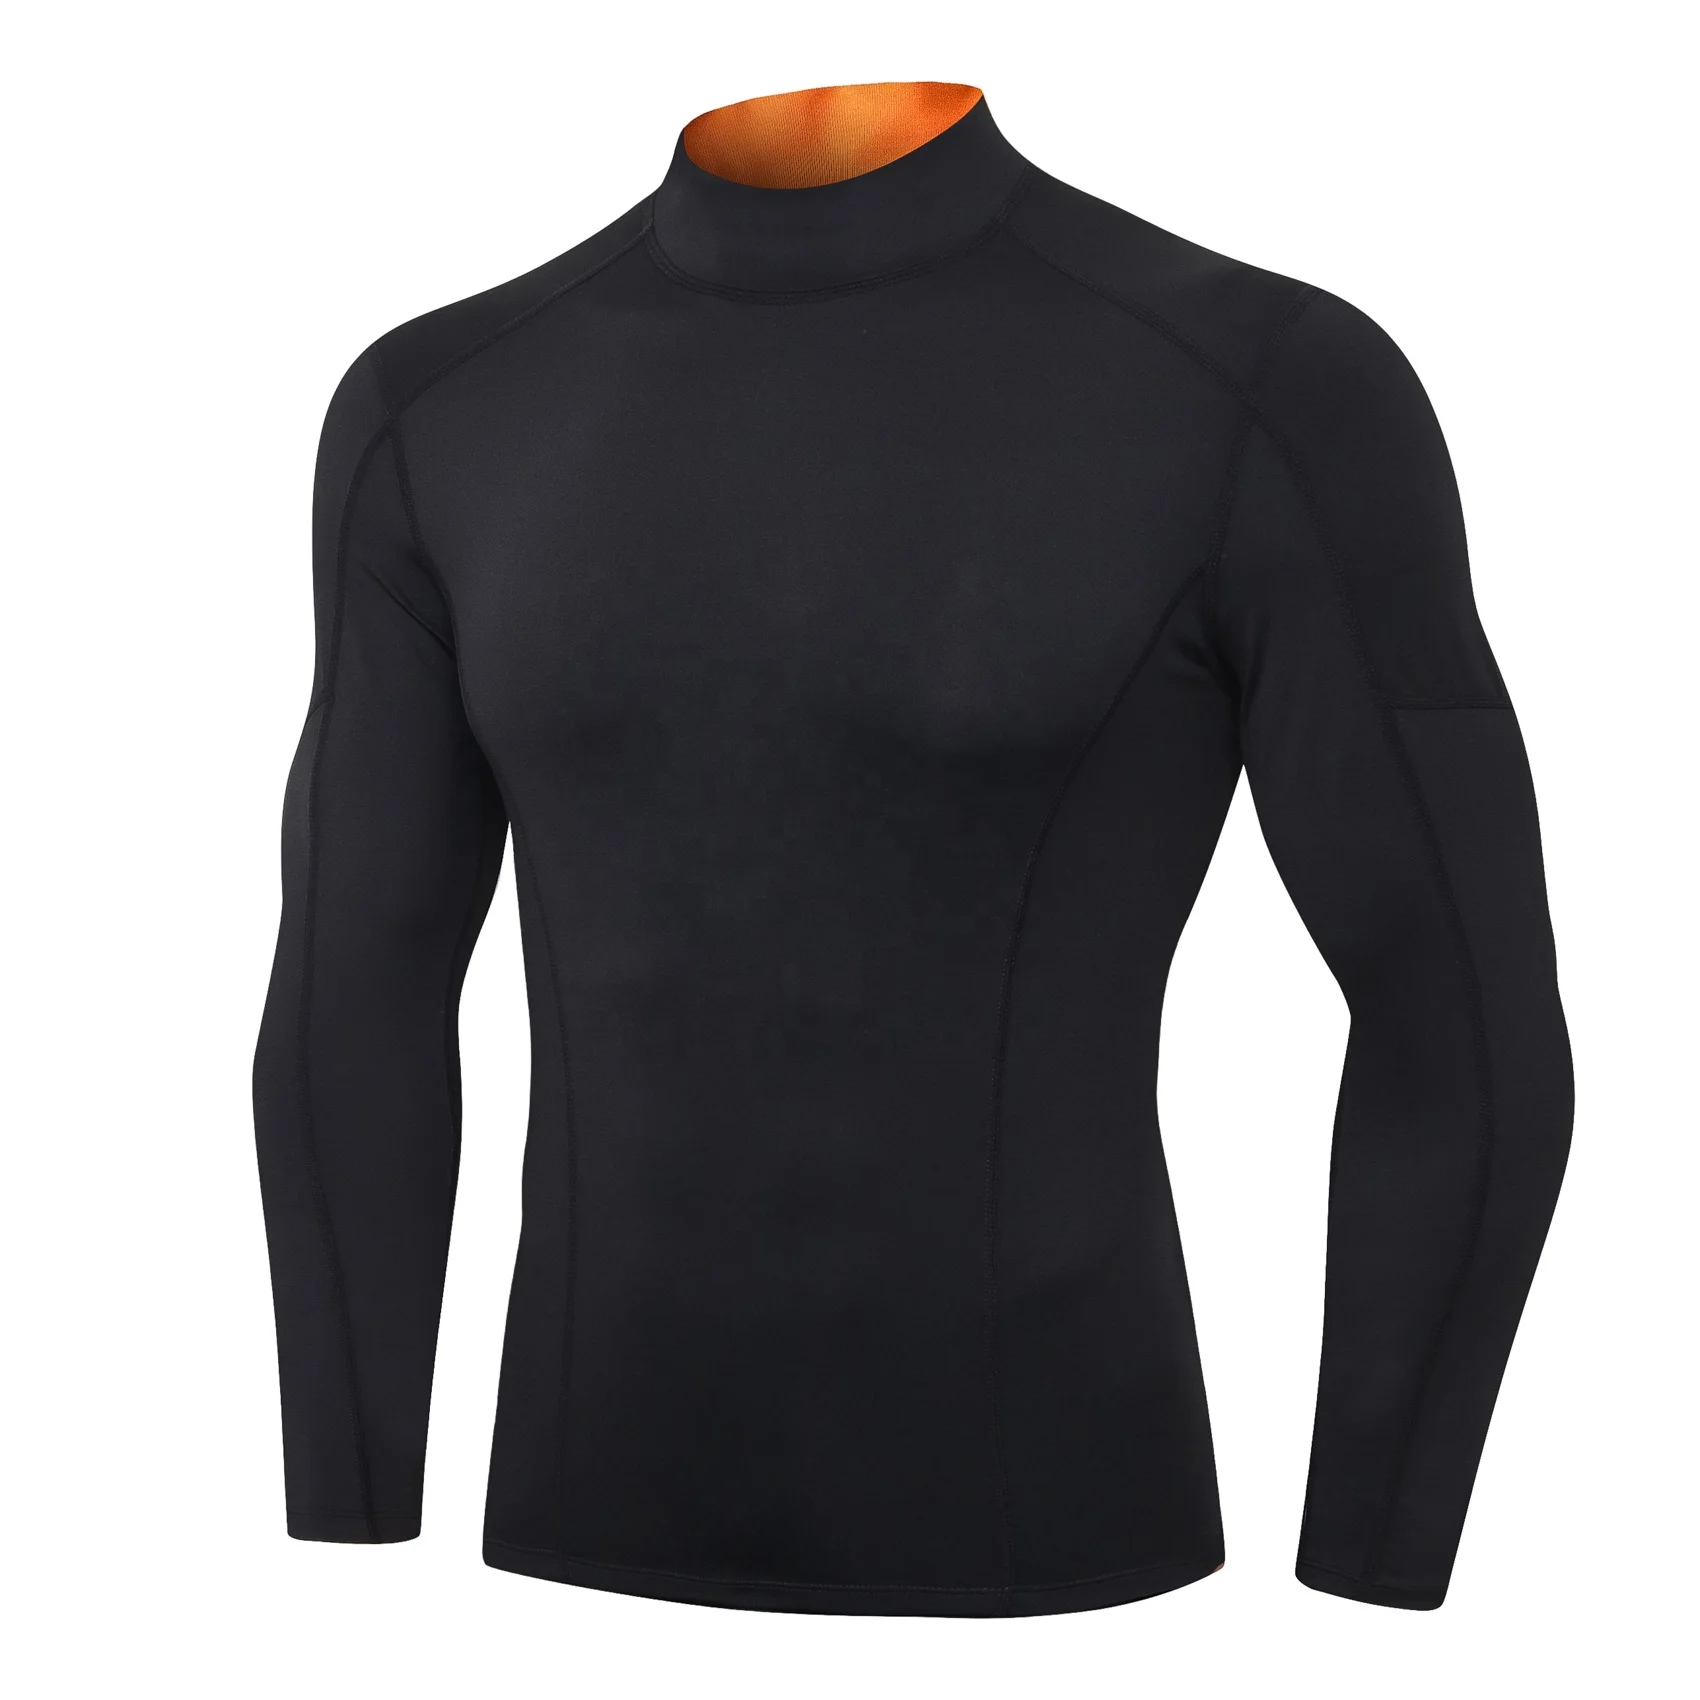 Mens Compression Shirt Quick-dry Workout Sports Athletic Base Layer Long Sleeve 